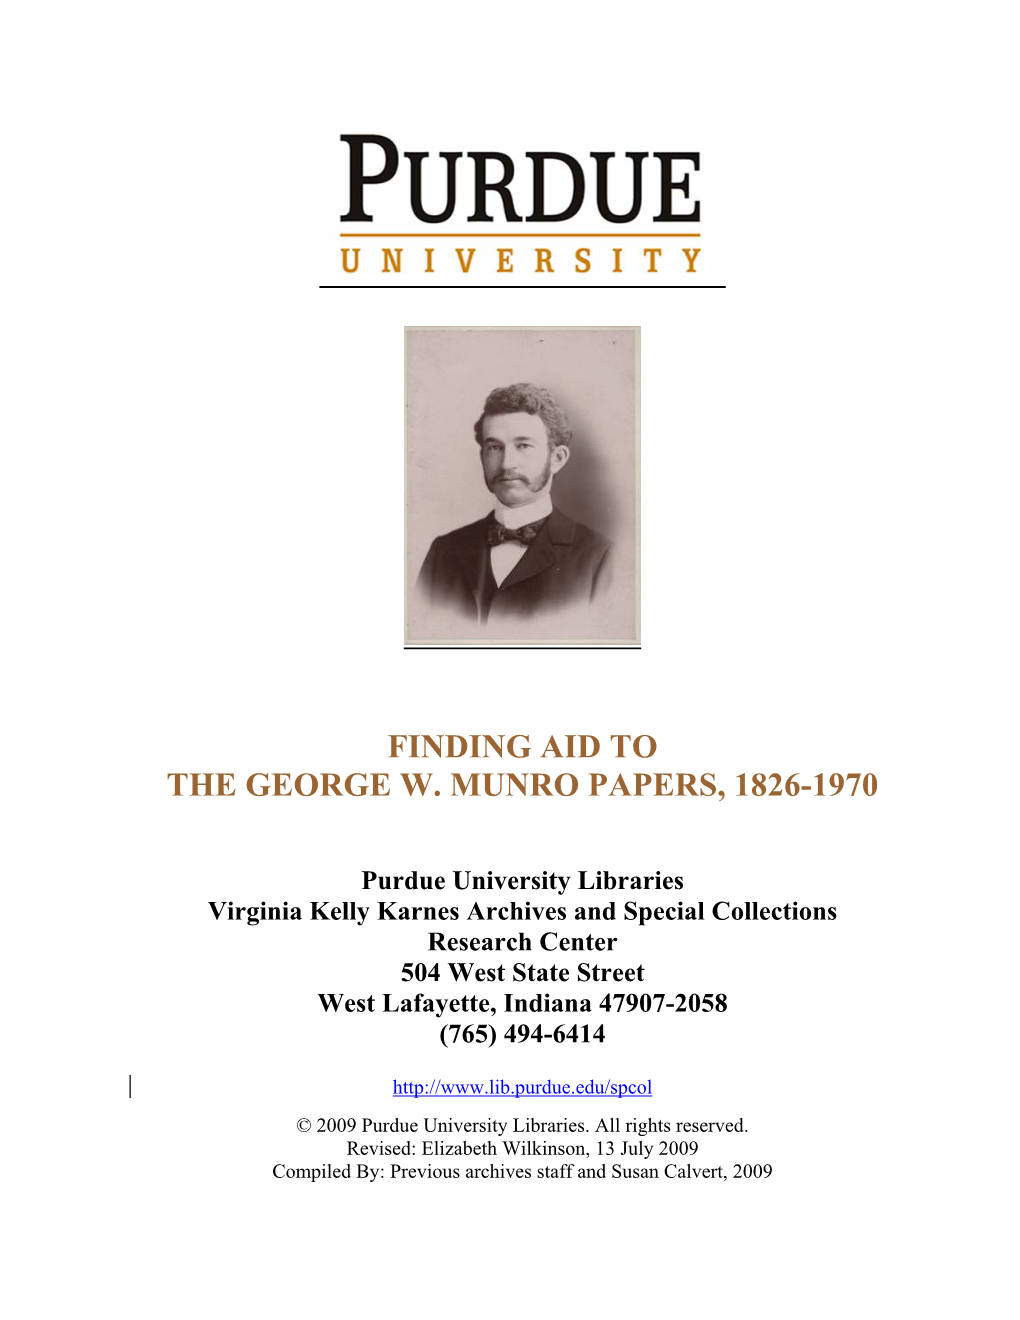 Finding Aid to the George W. Munro Papers, 1826-1970